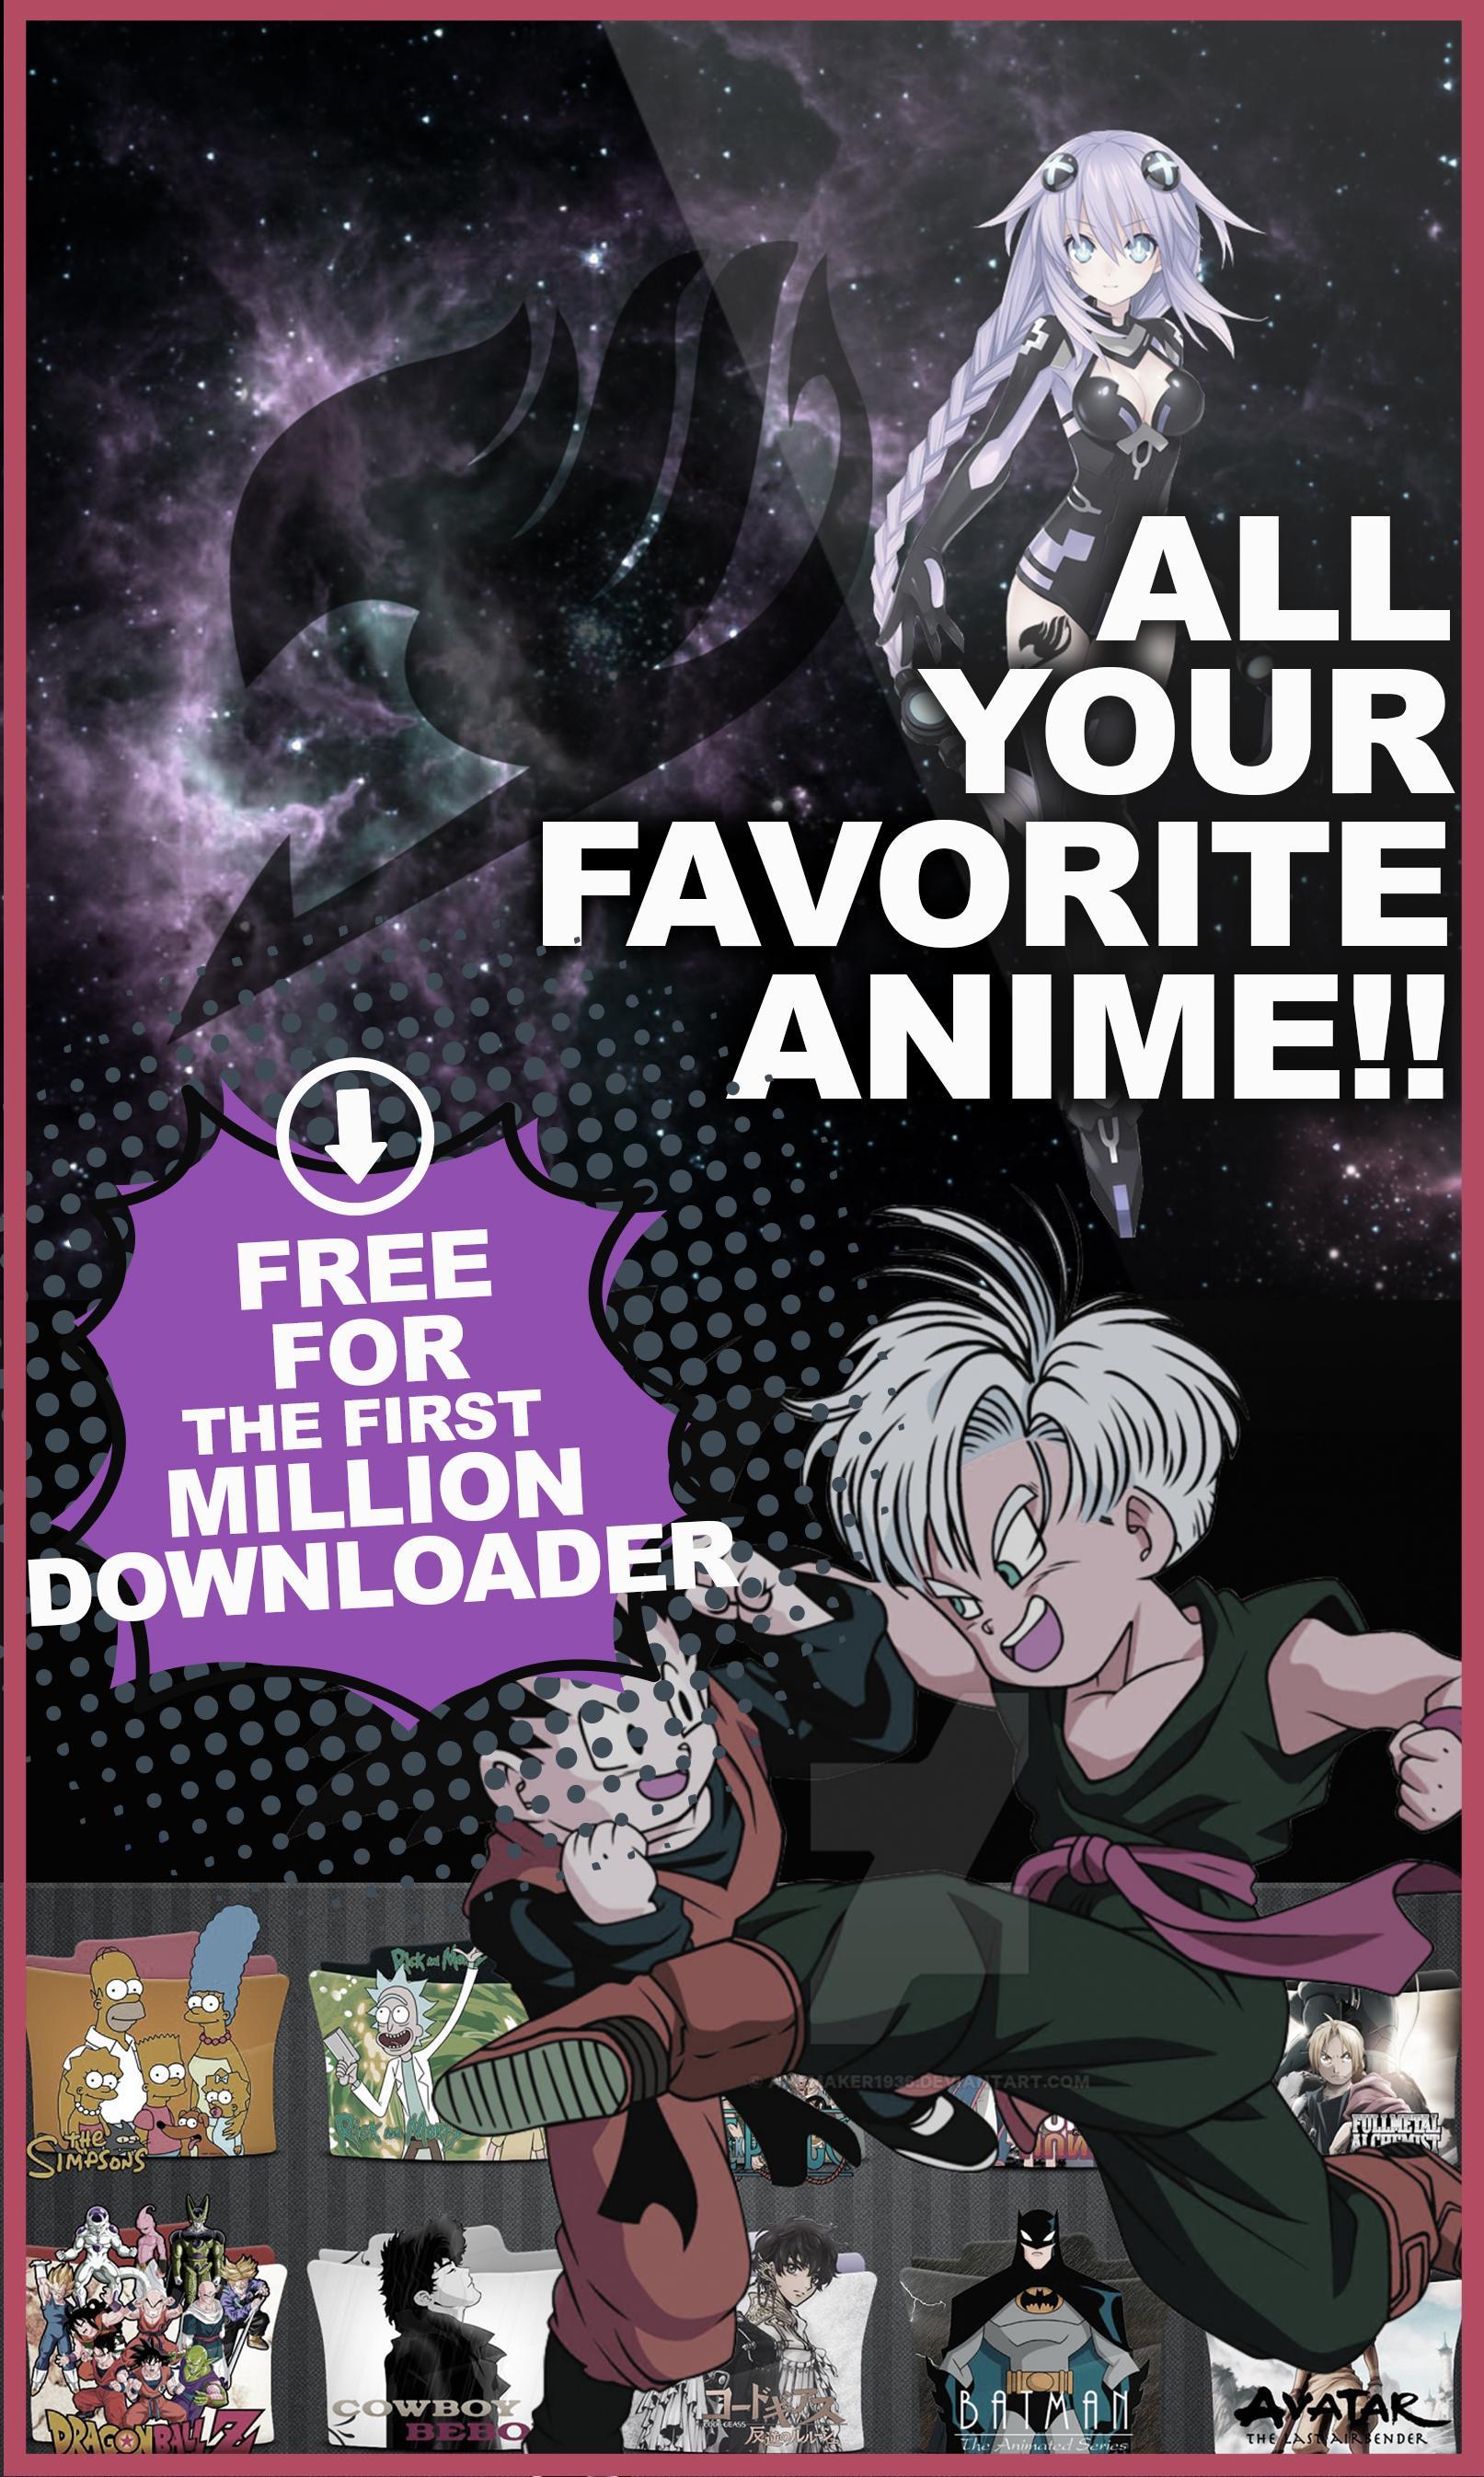 watch Kissanime tv: Free web browser 2018 for Android - APK Download